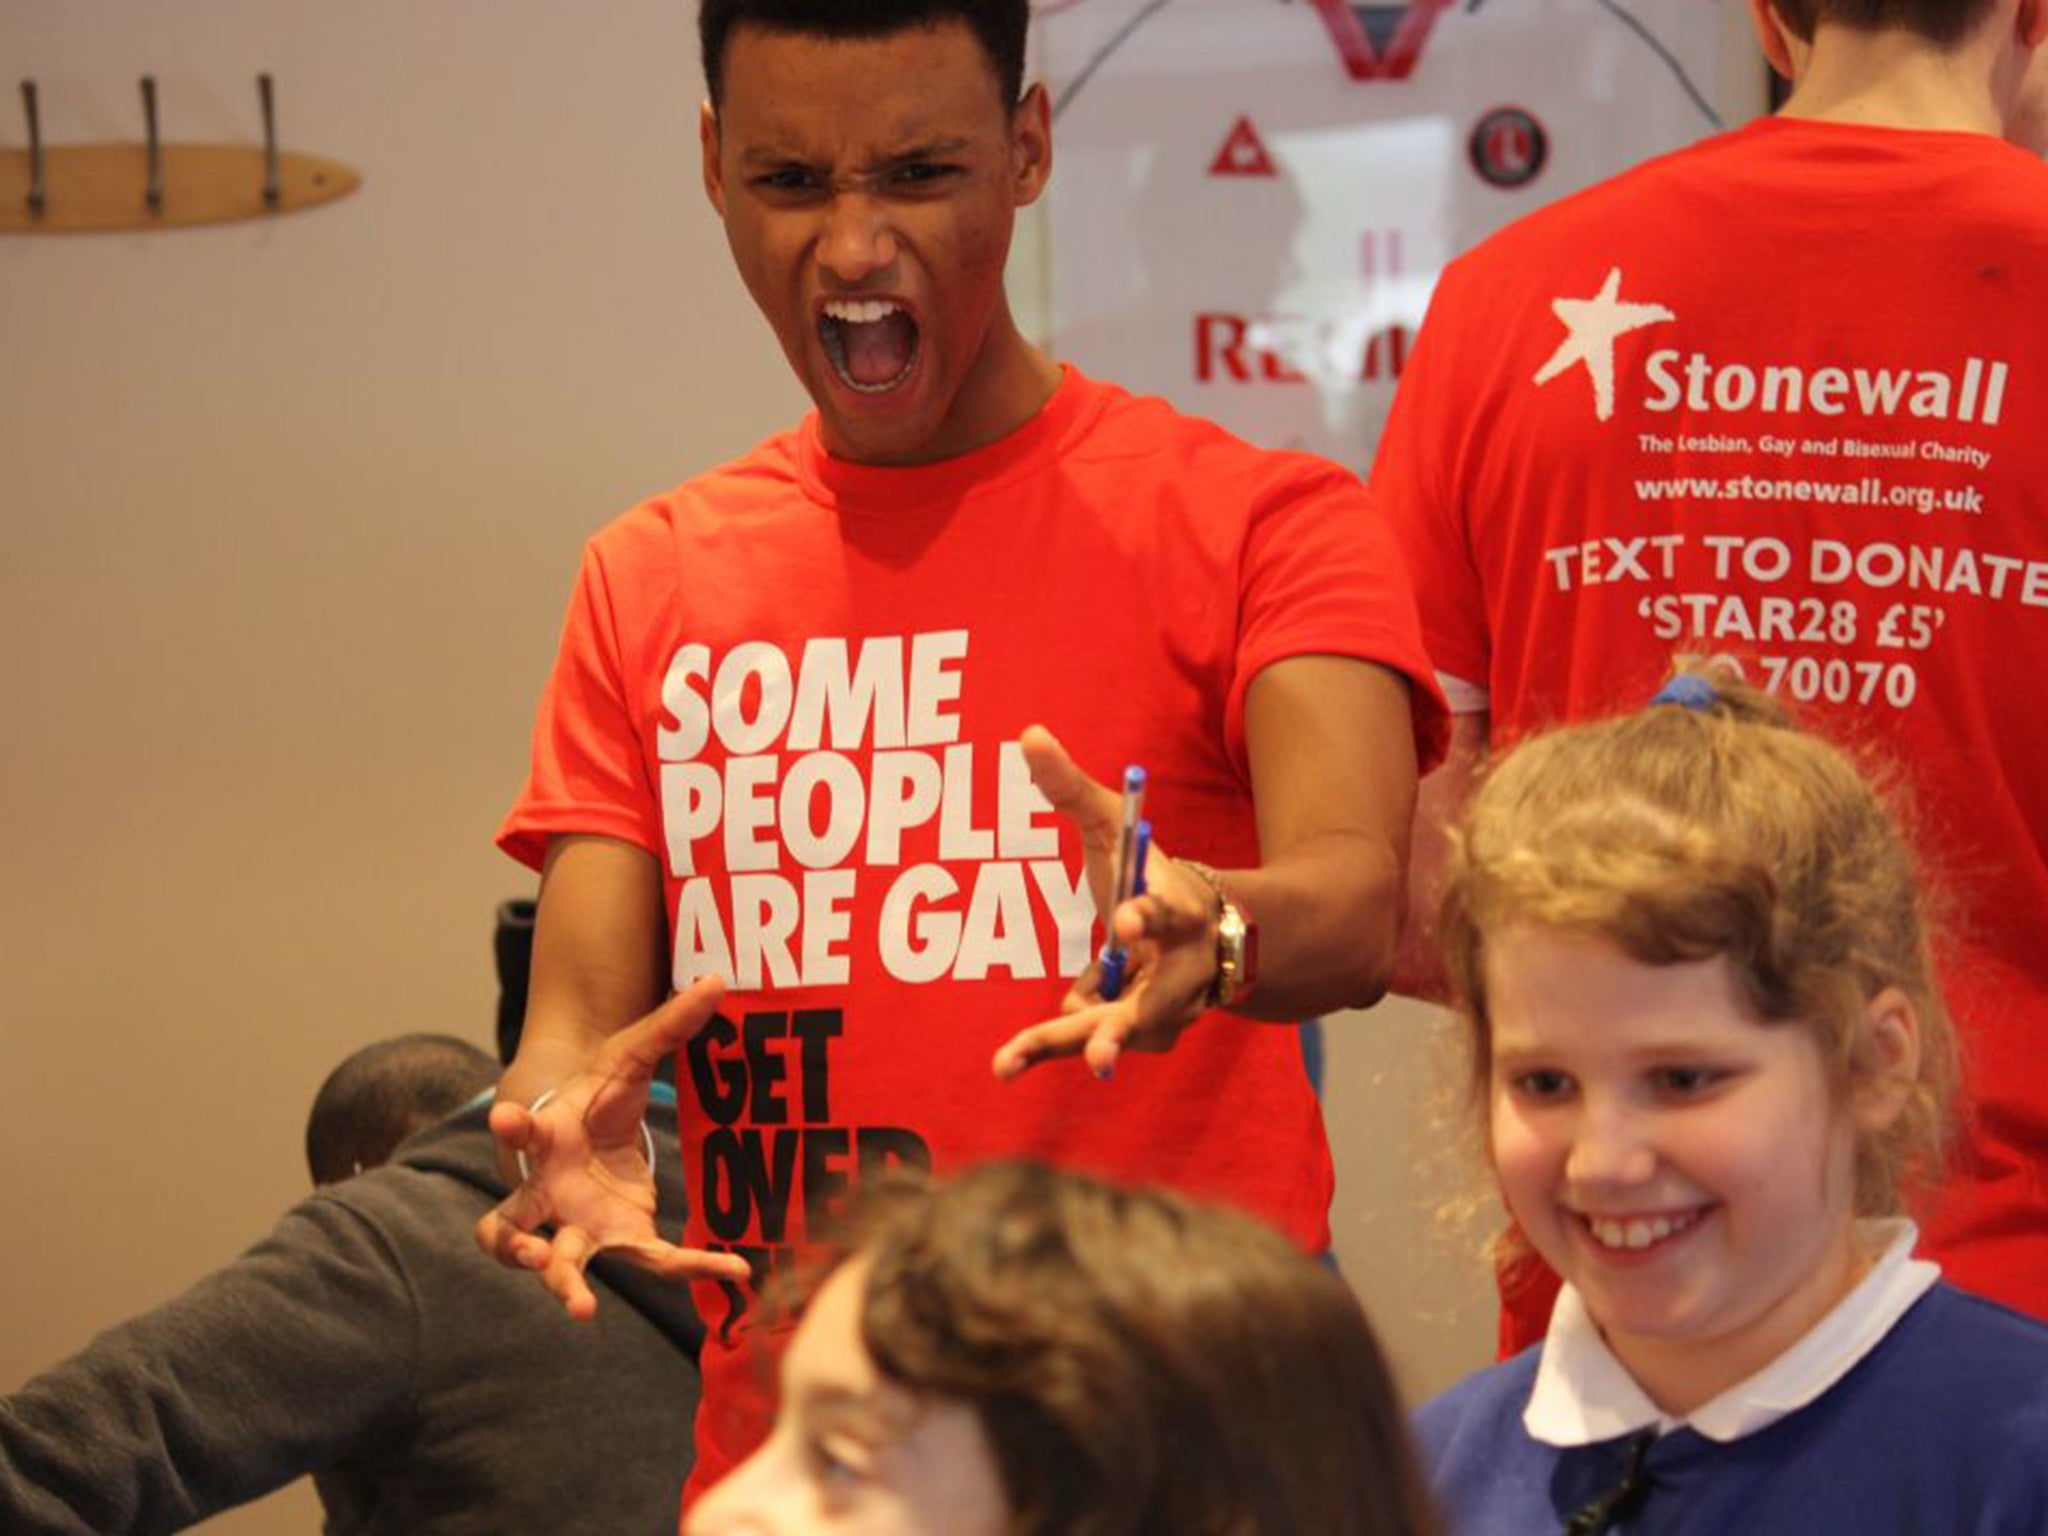 The Stonewall charity's Education Champions programme supports diversity and promotes tolerance in schools